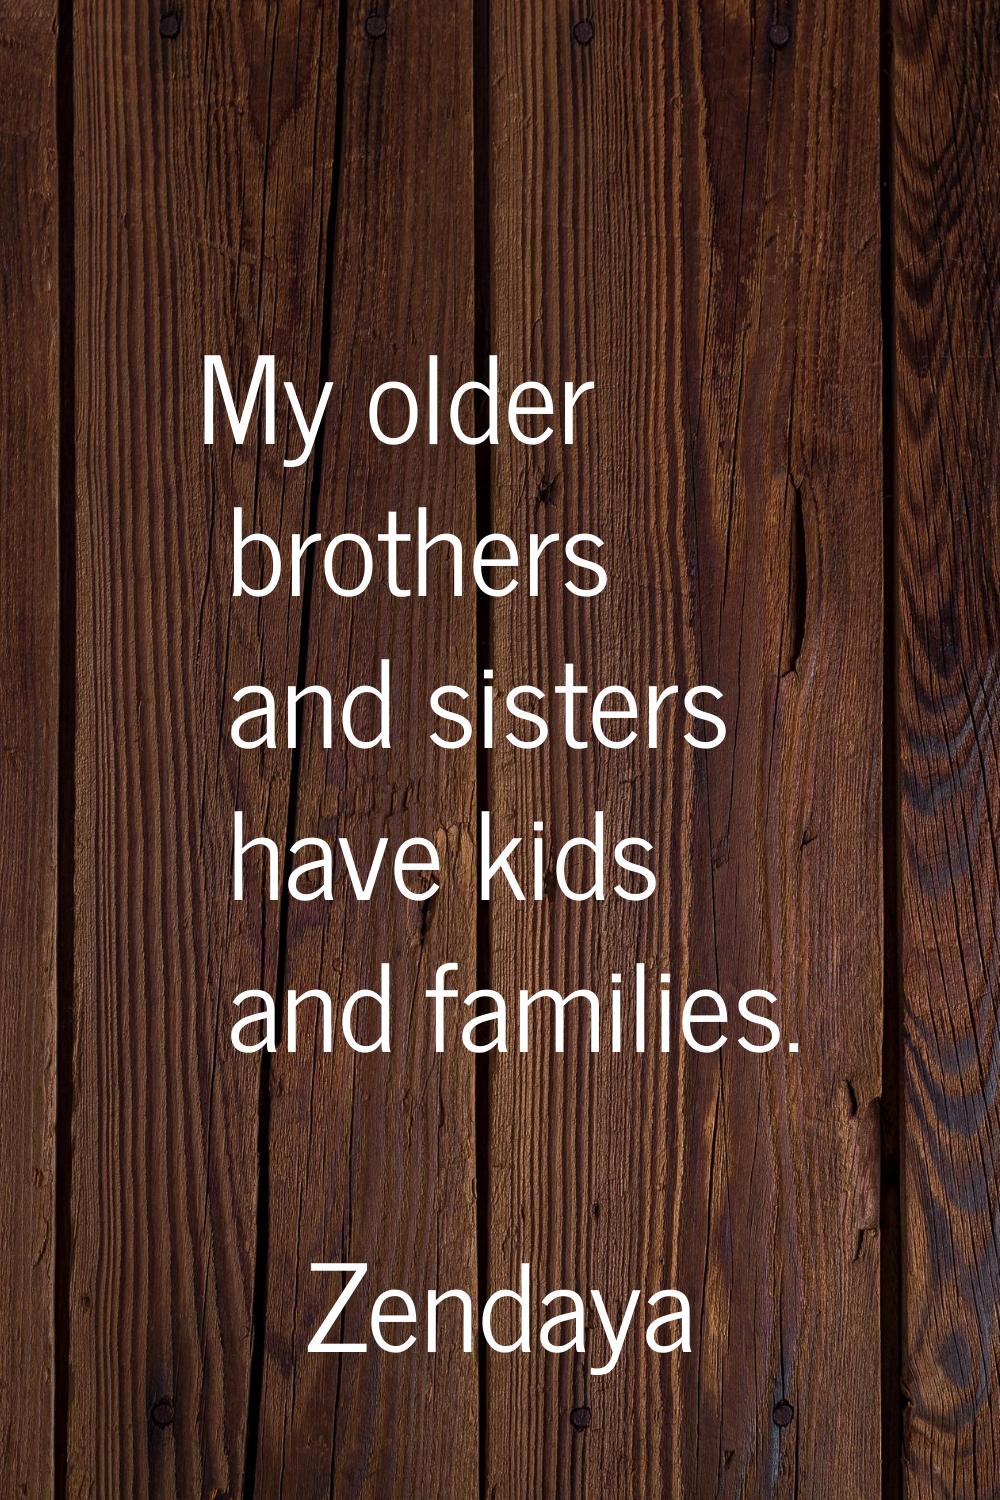 My older brothers and sisters have kids and families.